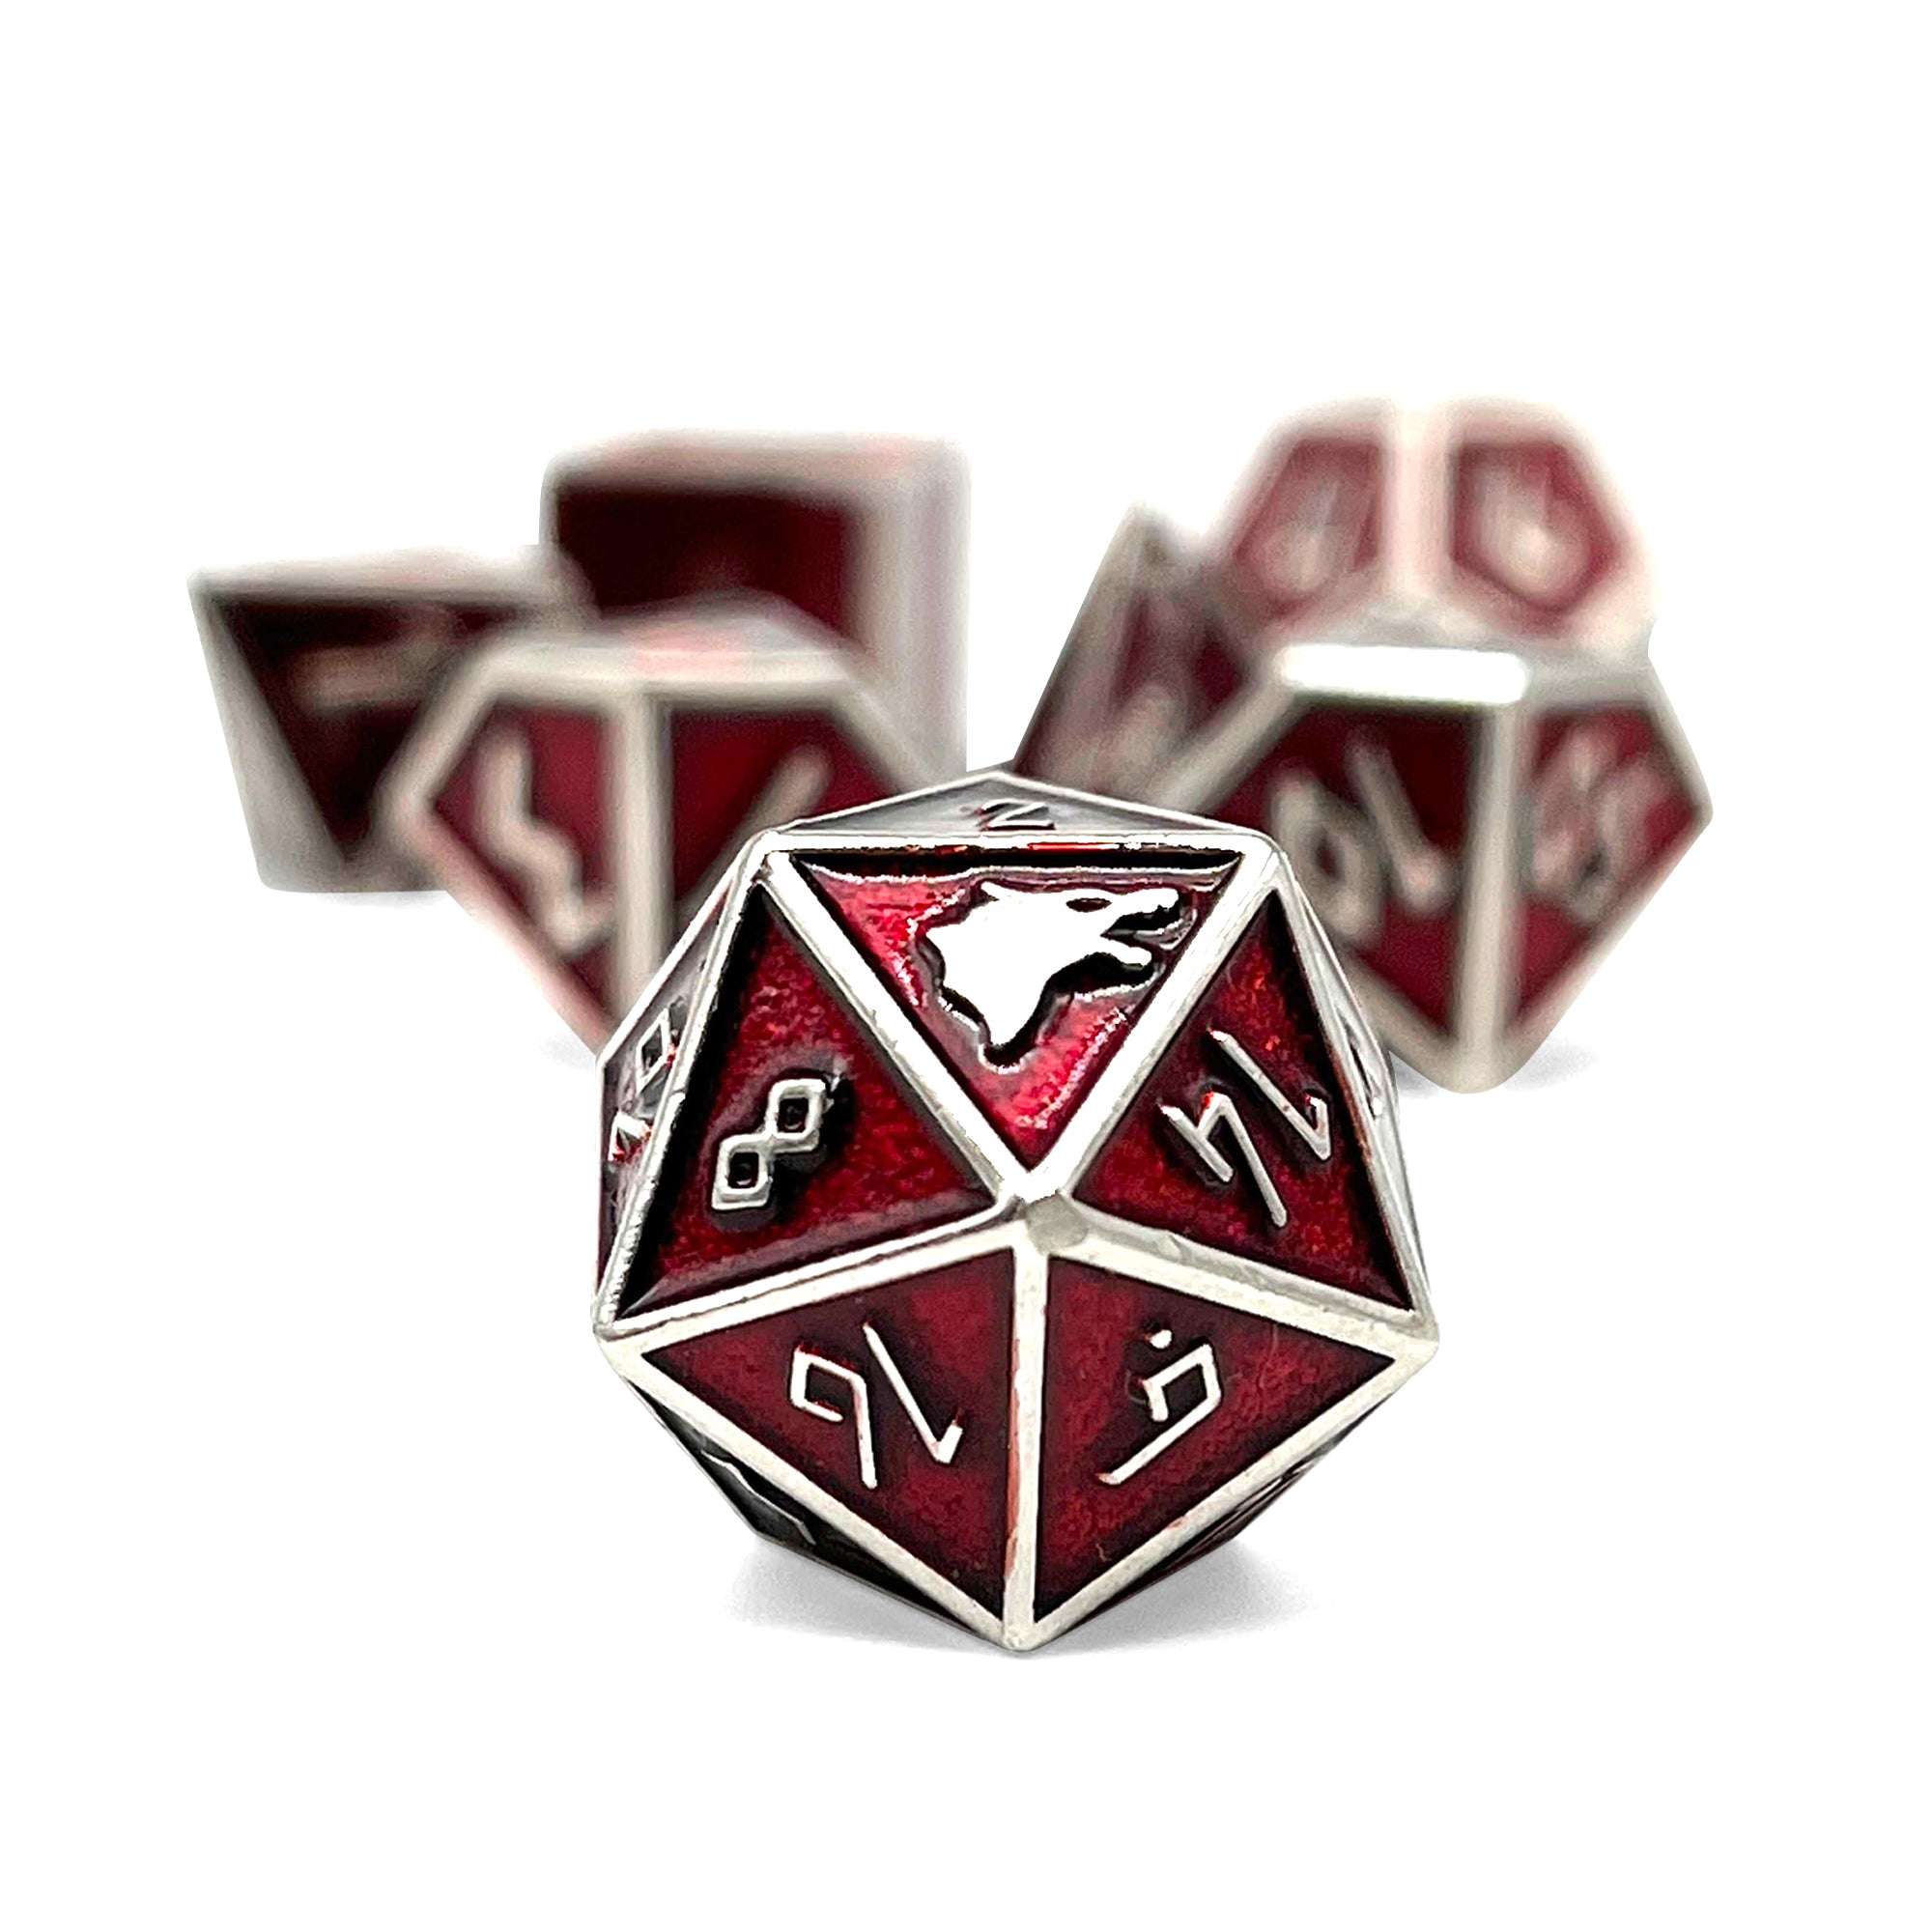 Vampire Blood - Norse Themed Metal Dice Set